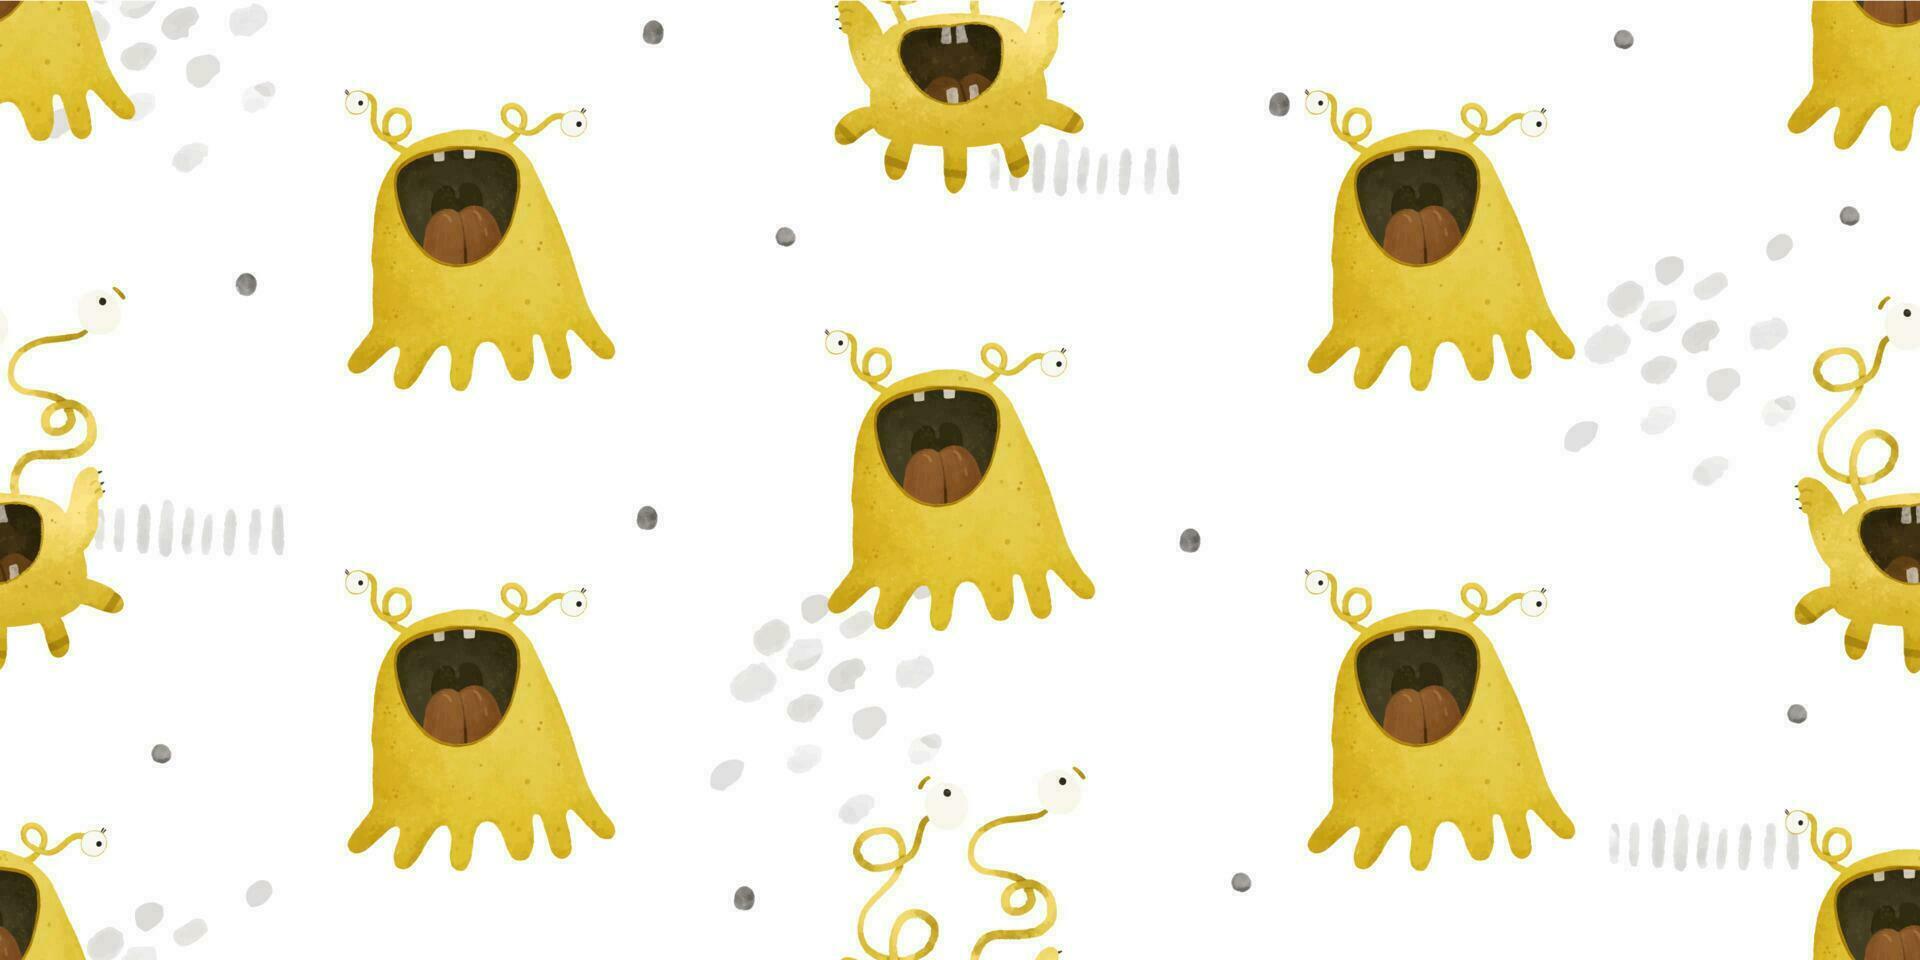 endless pattern with monsters, funny cartoon monsters, mutants, space childish illustration vector